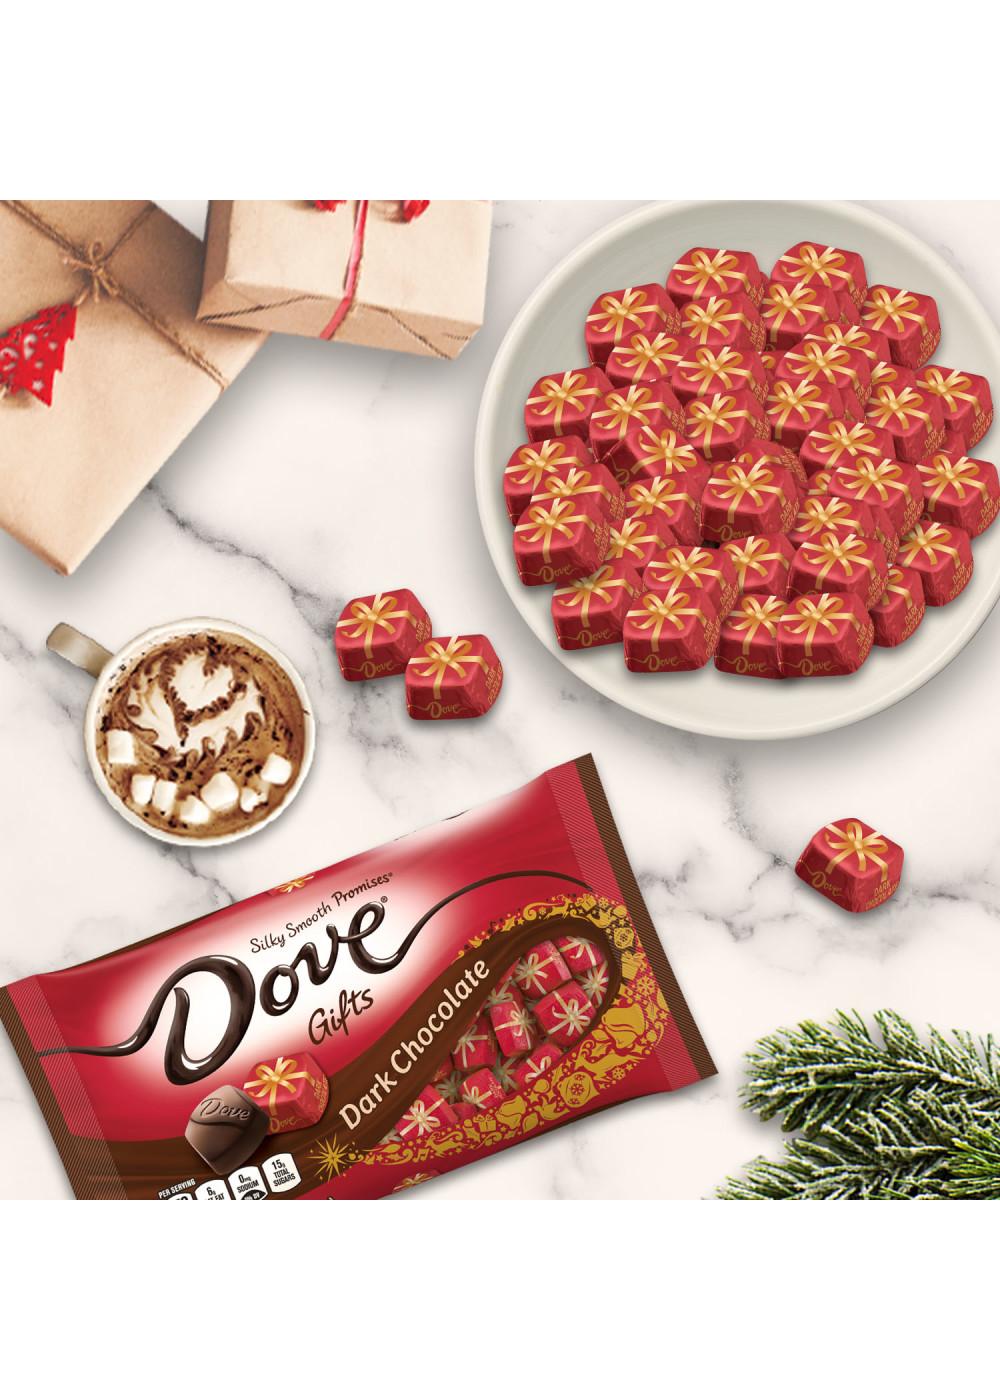 Dove Gifts Dark Chocolate Holiday Candy; image 6 of 8